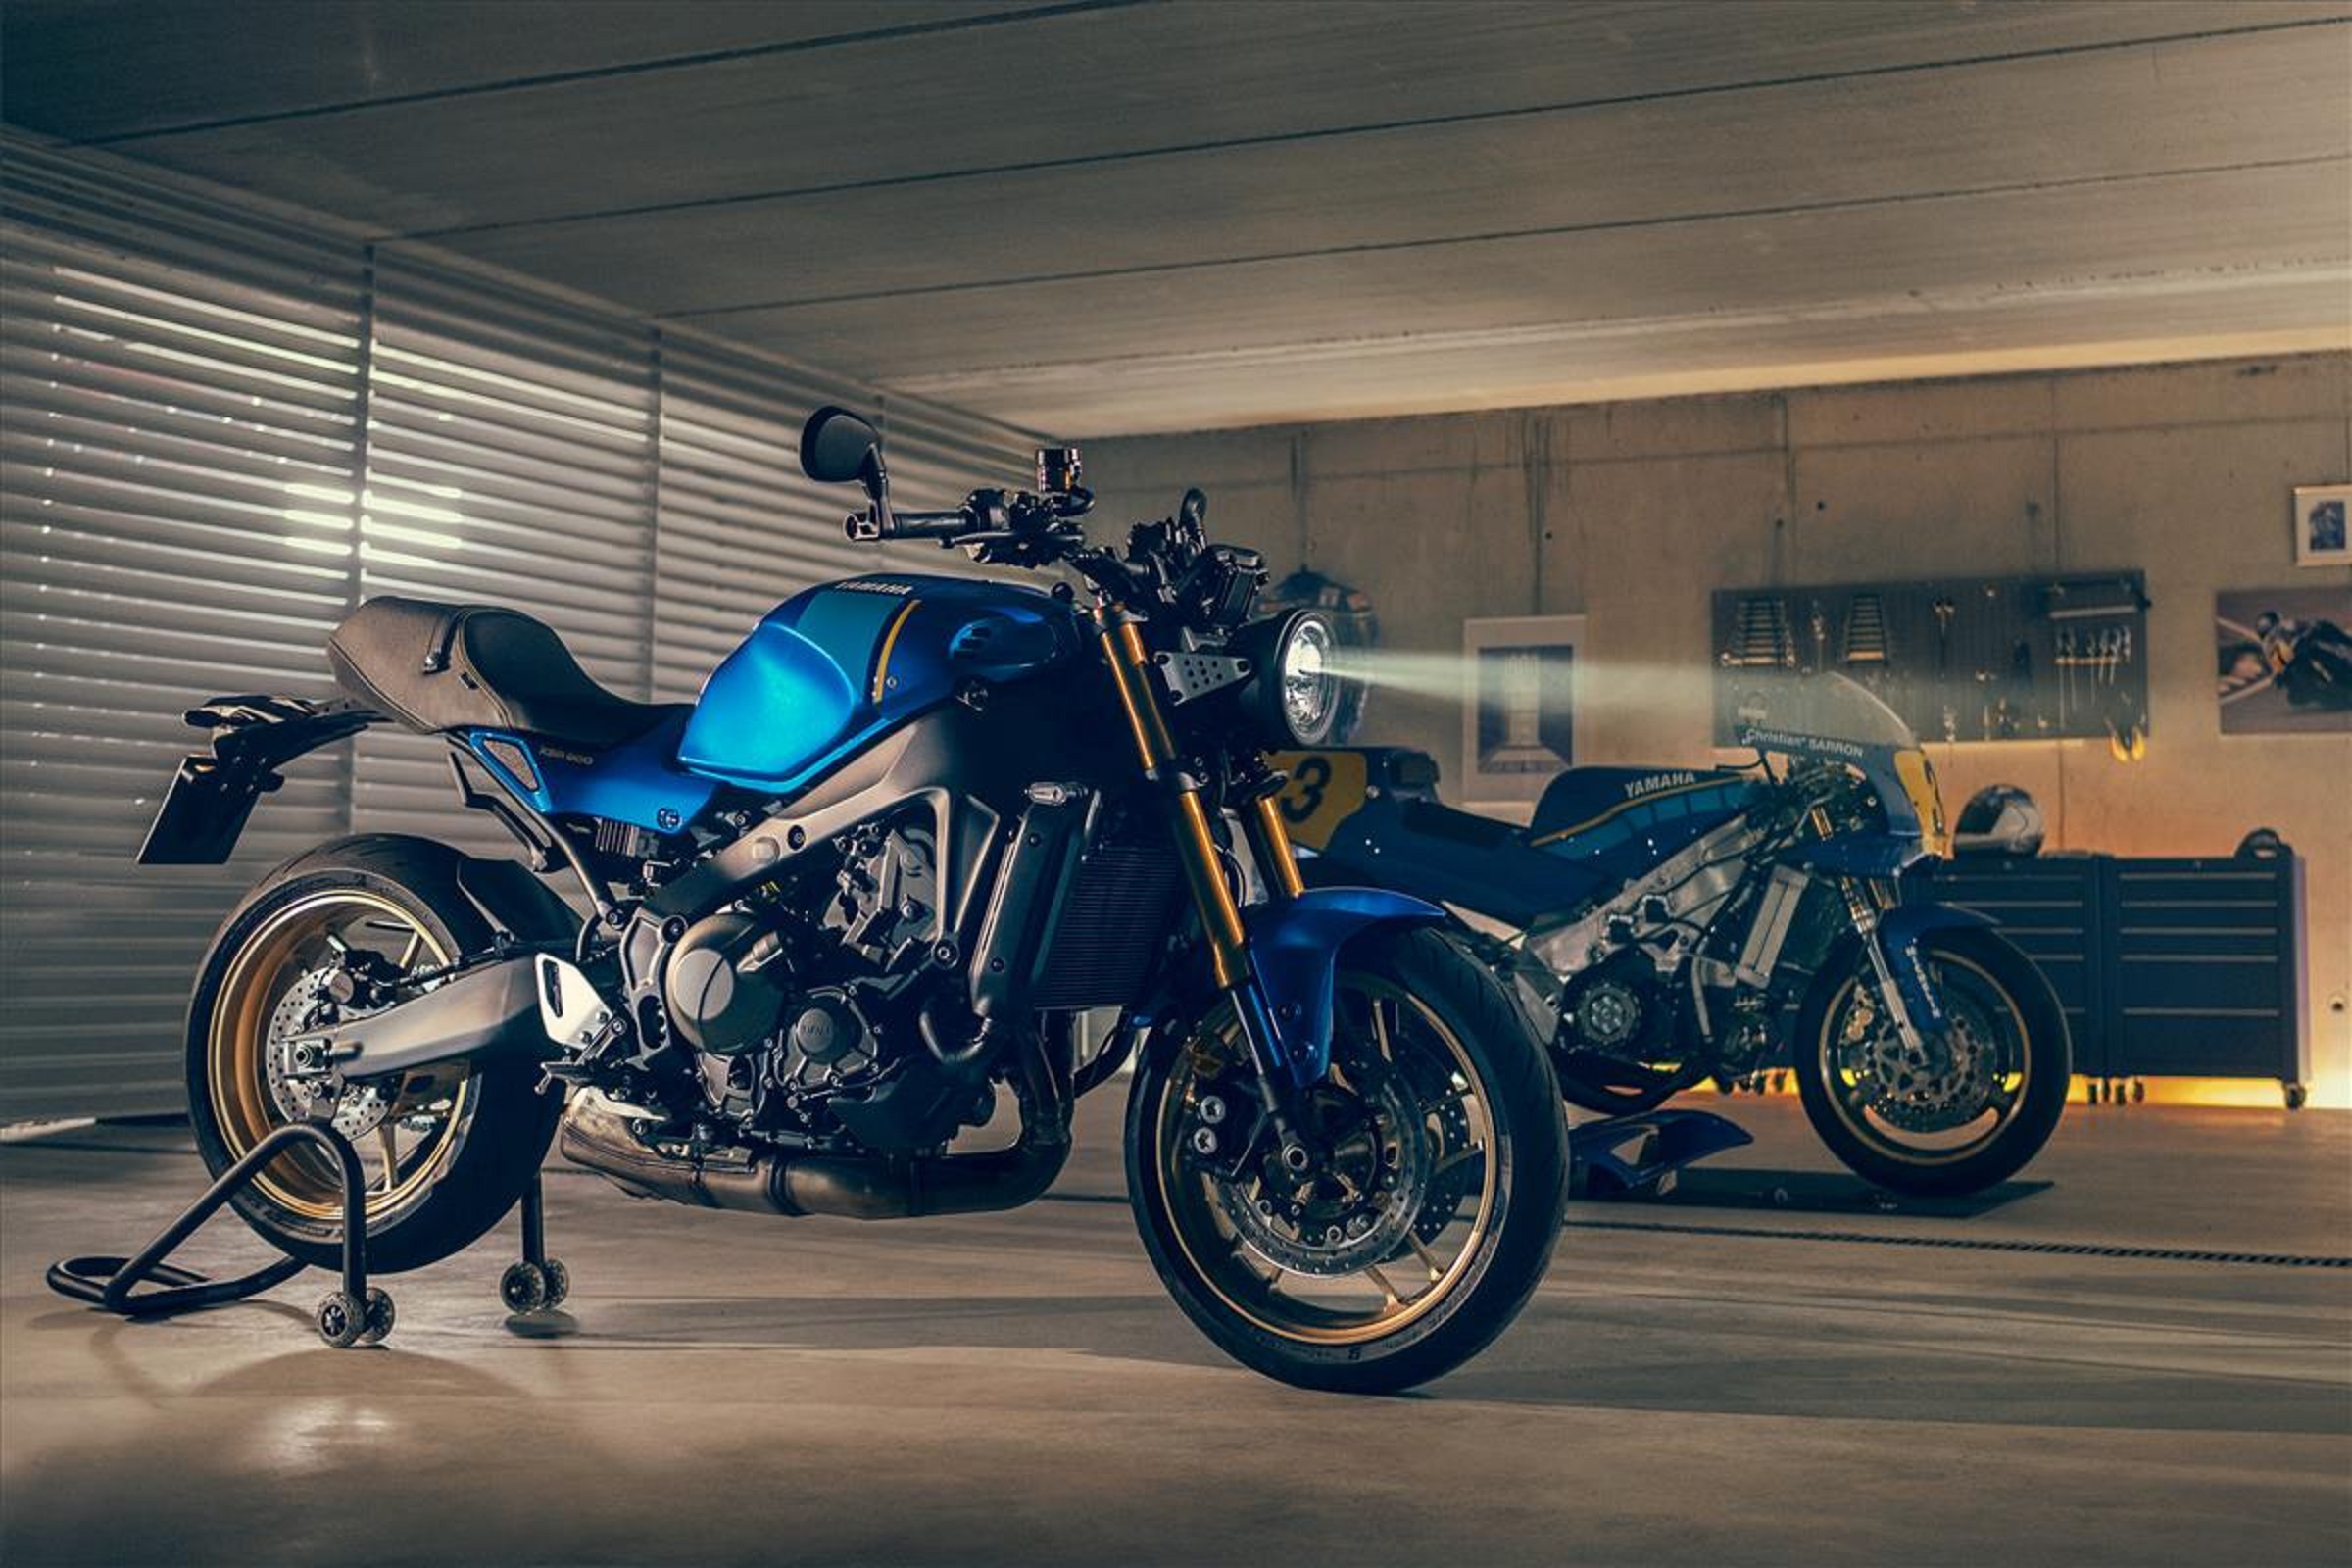 A blue-and-black 2022 Yamaha XSR900 in a garage in front of a blue 1980s Yamaha GP race bike